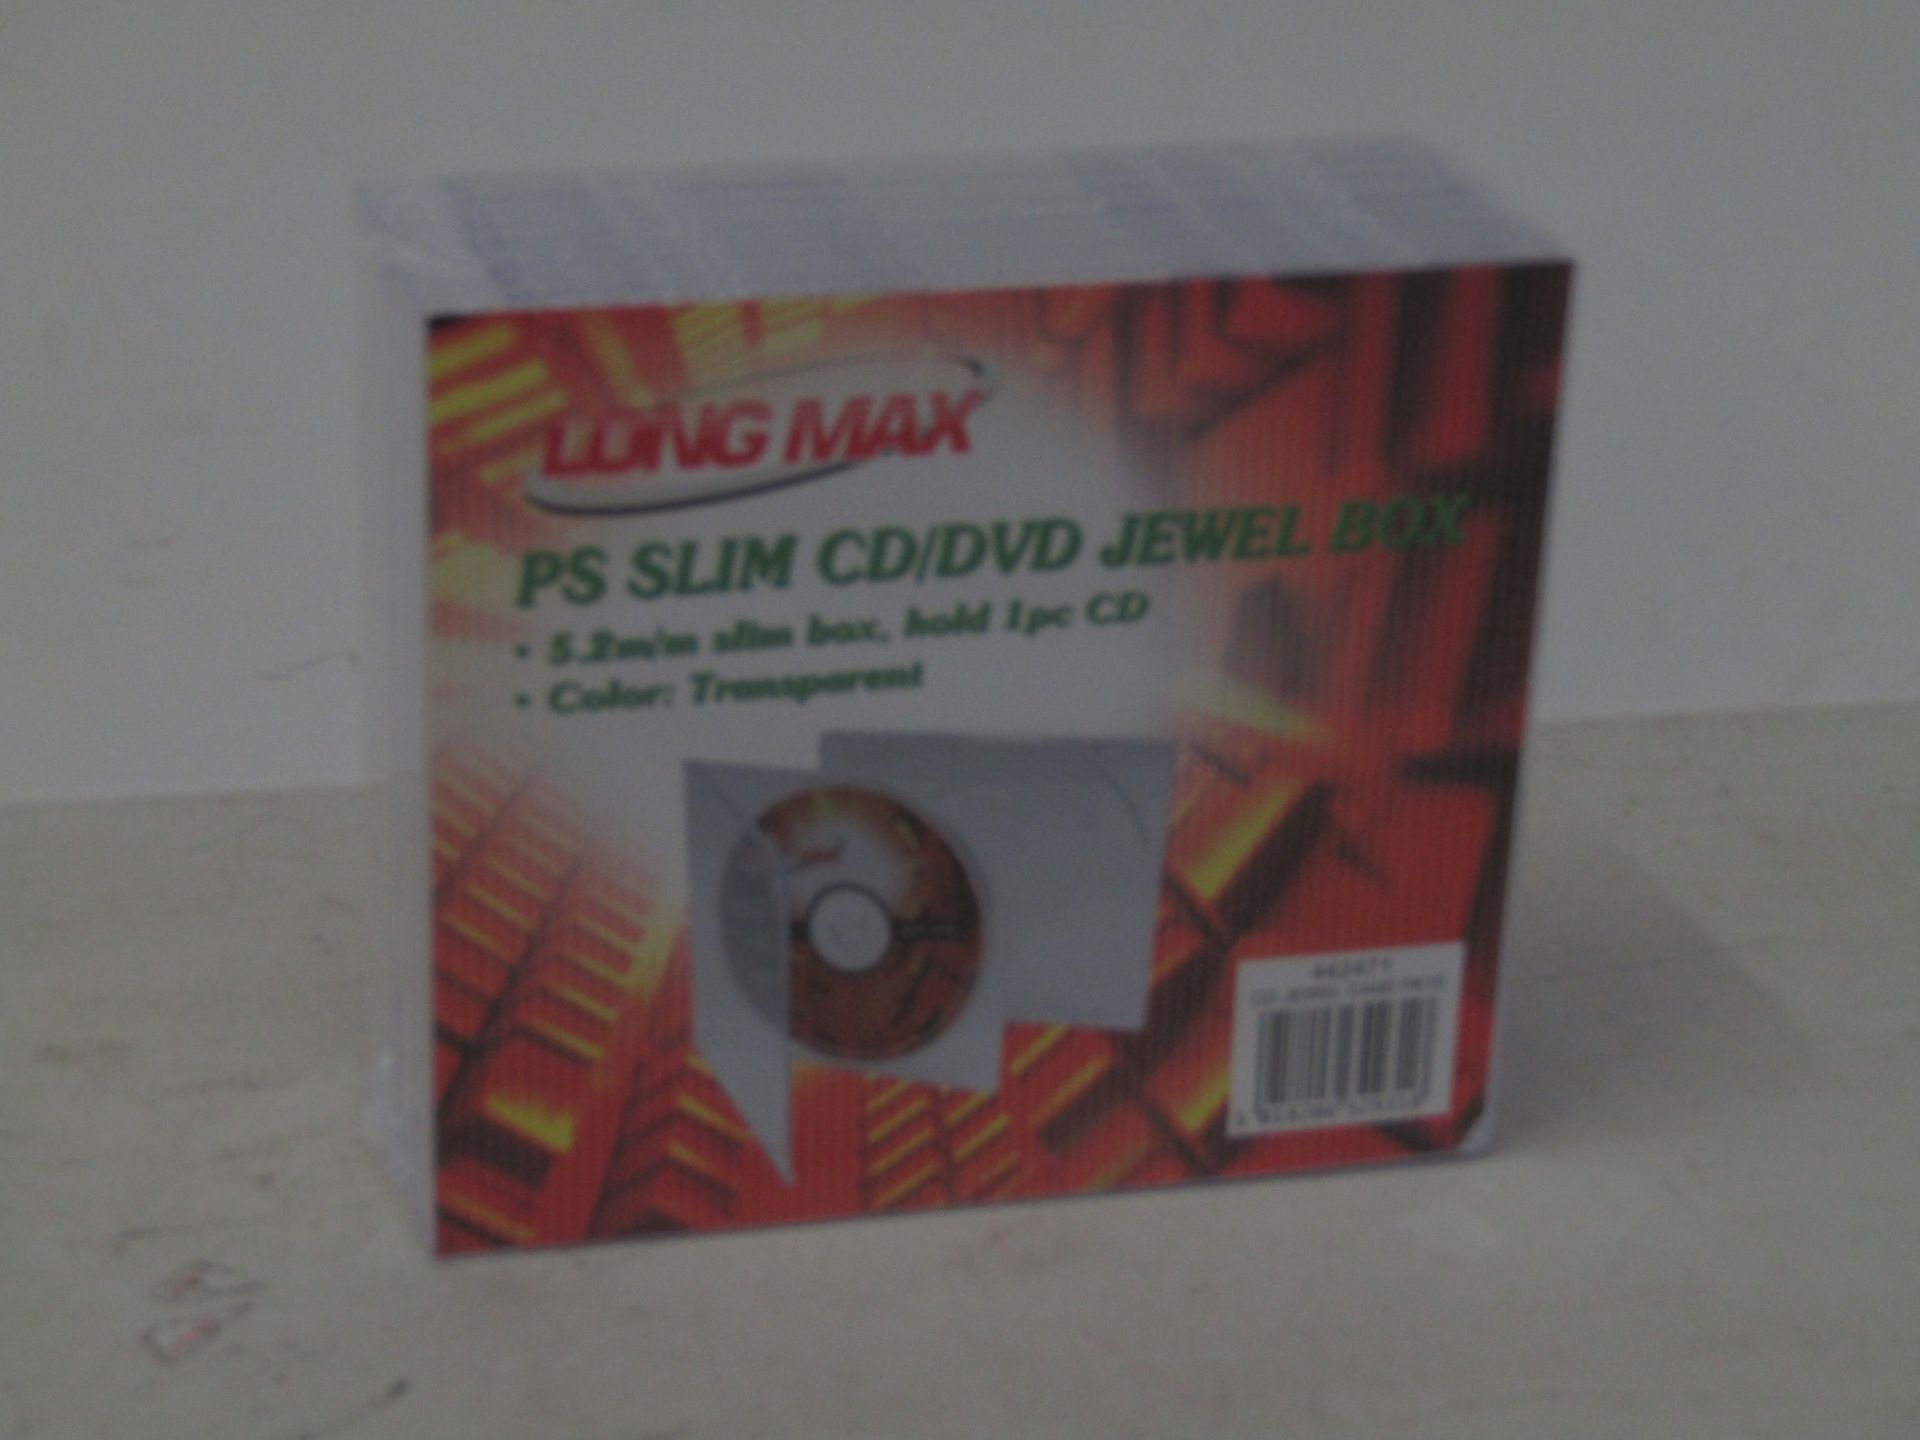 Box of Long Max clear ps slim cd/dvd jewel box, New and boxed.